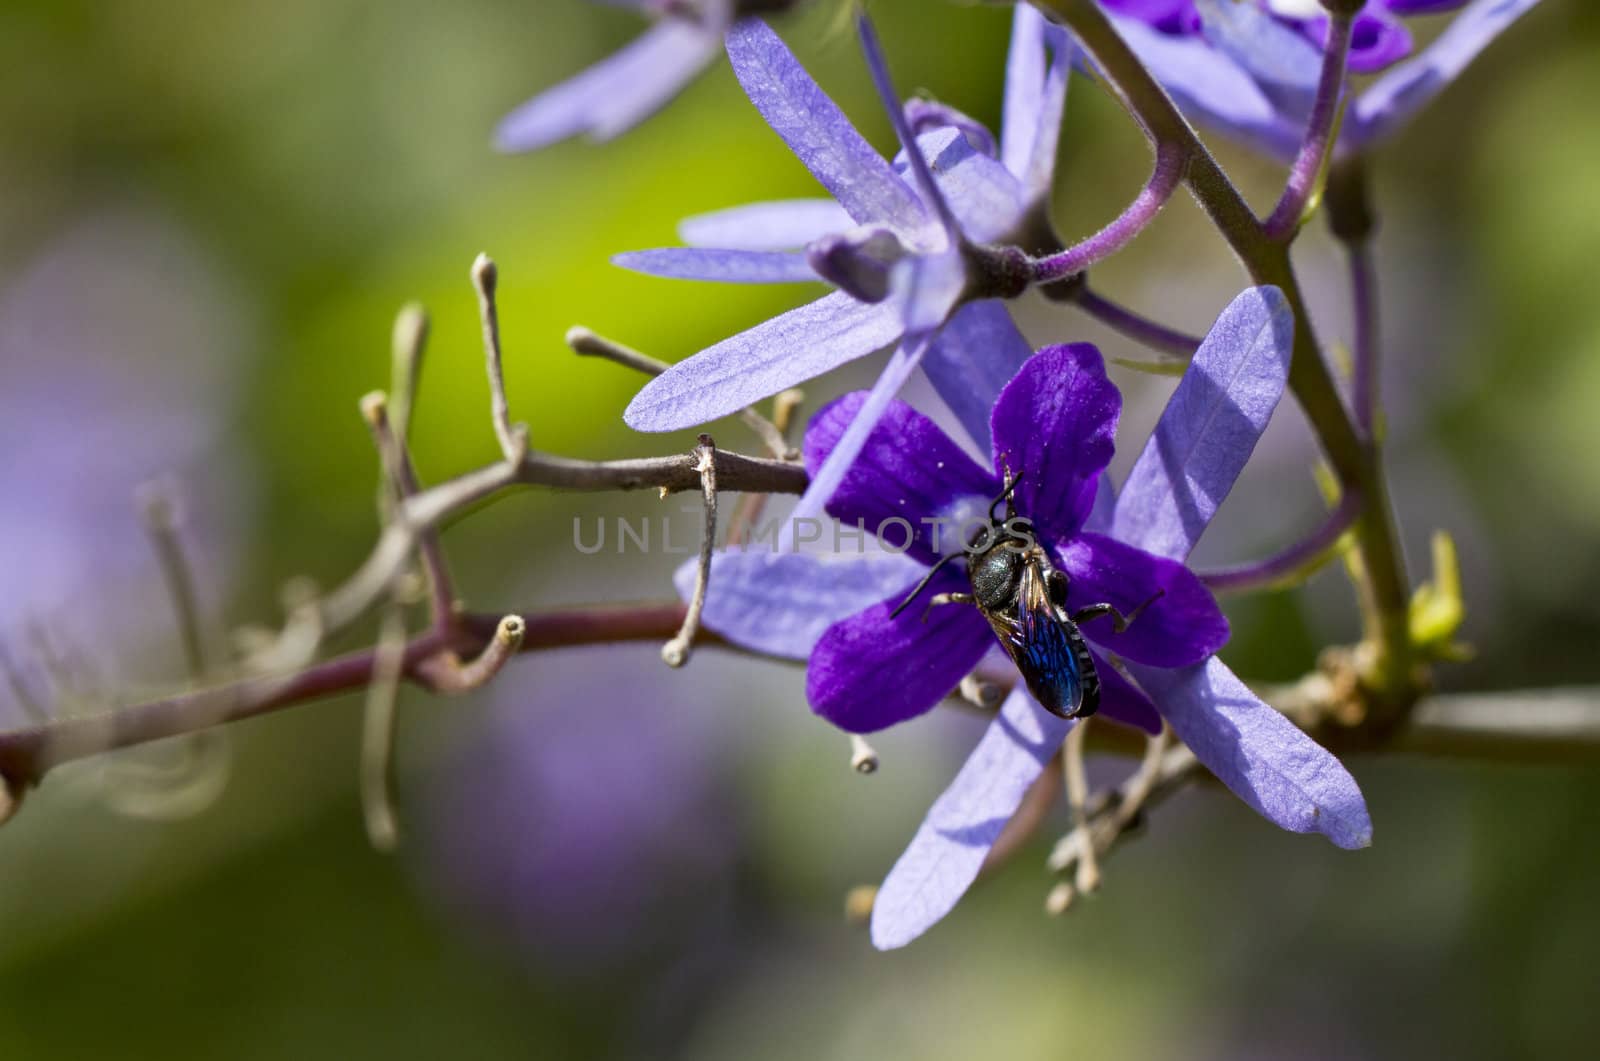 Wasp and Purple Flowers by azamshah72